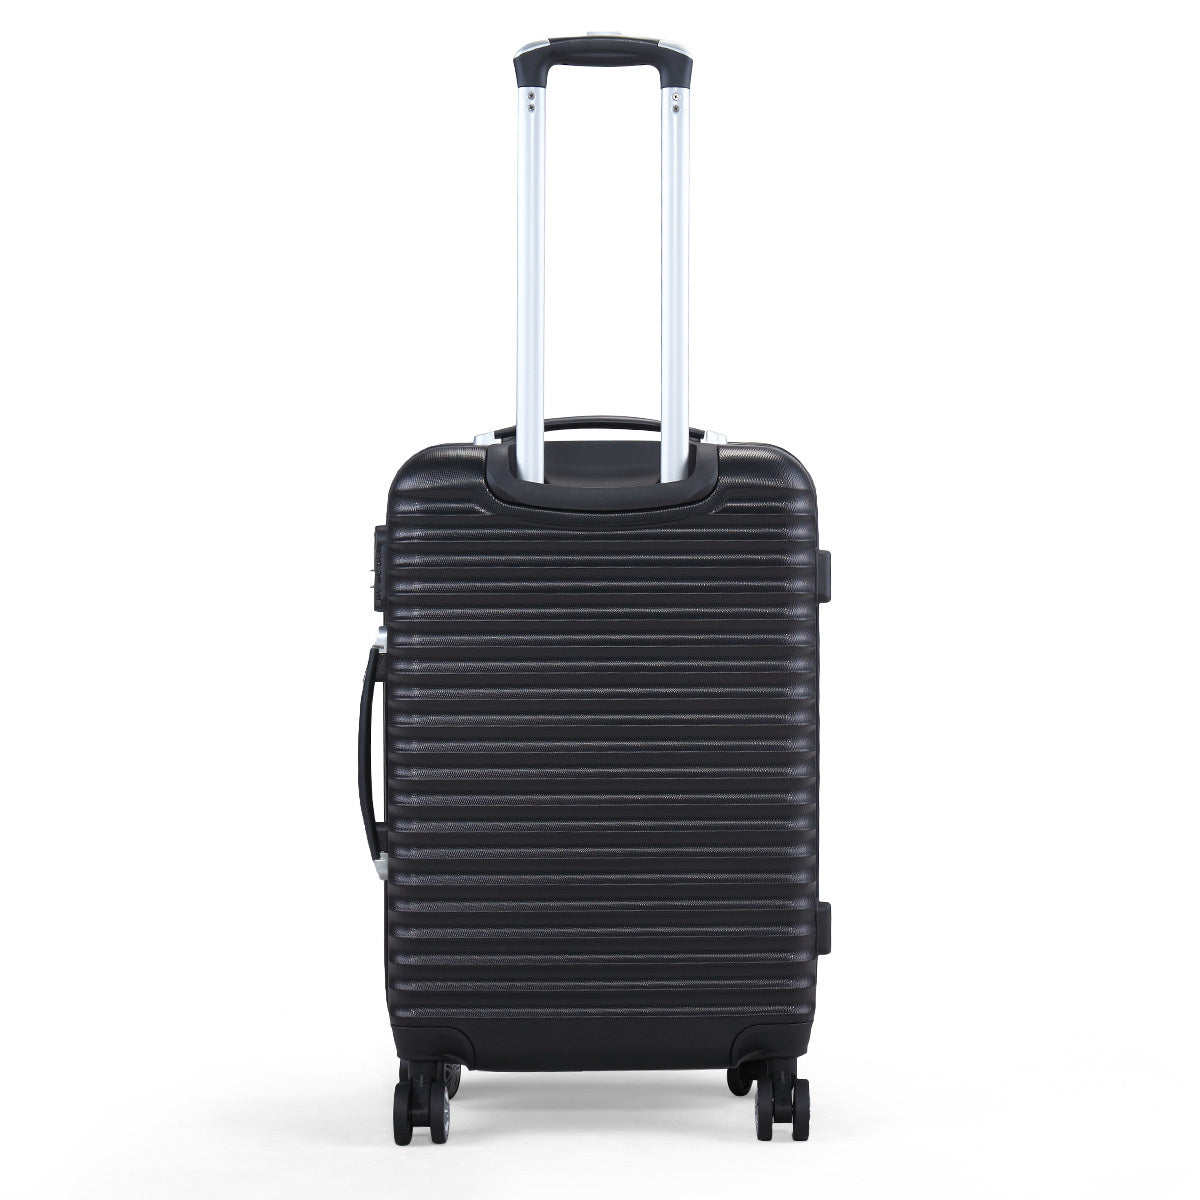 Set of 3 Trolley Suitcases Travel Luggage Storage black-abs